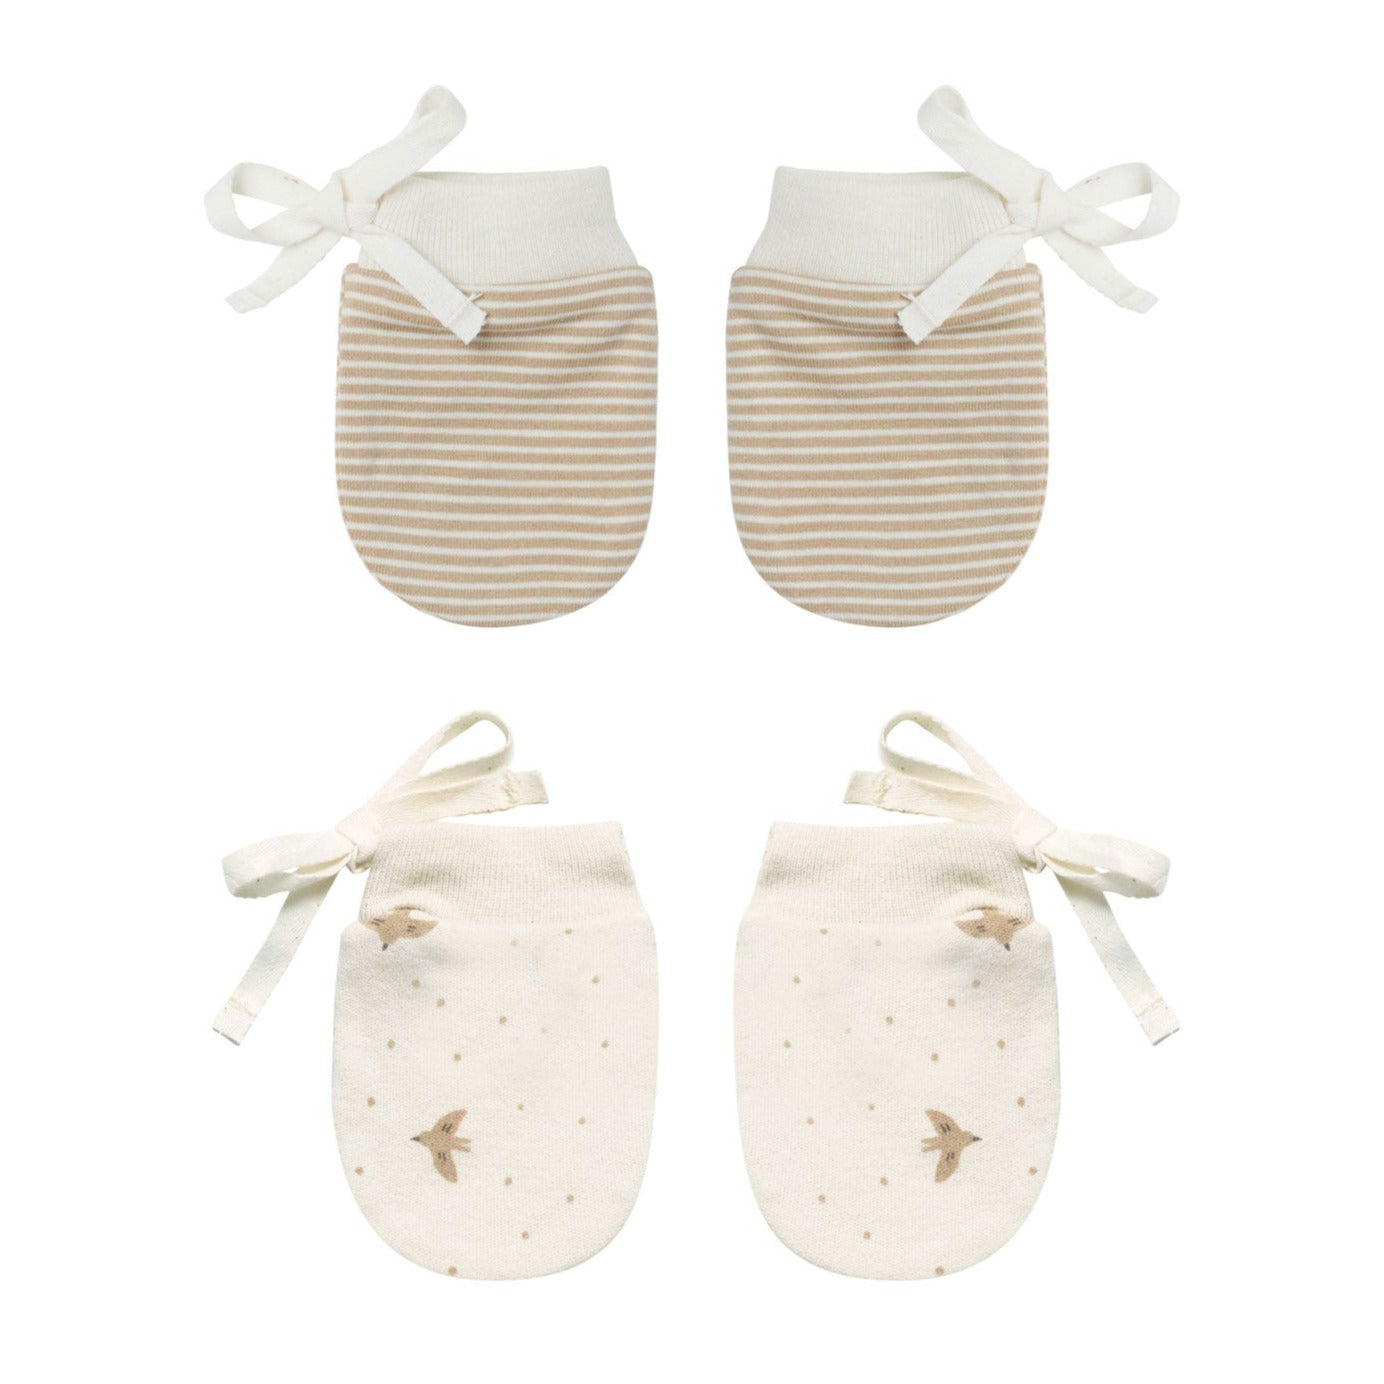 Quincy Mae No Scratch Mittens - Doves Ivory / Latte Micro Stripe